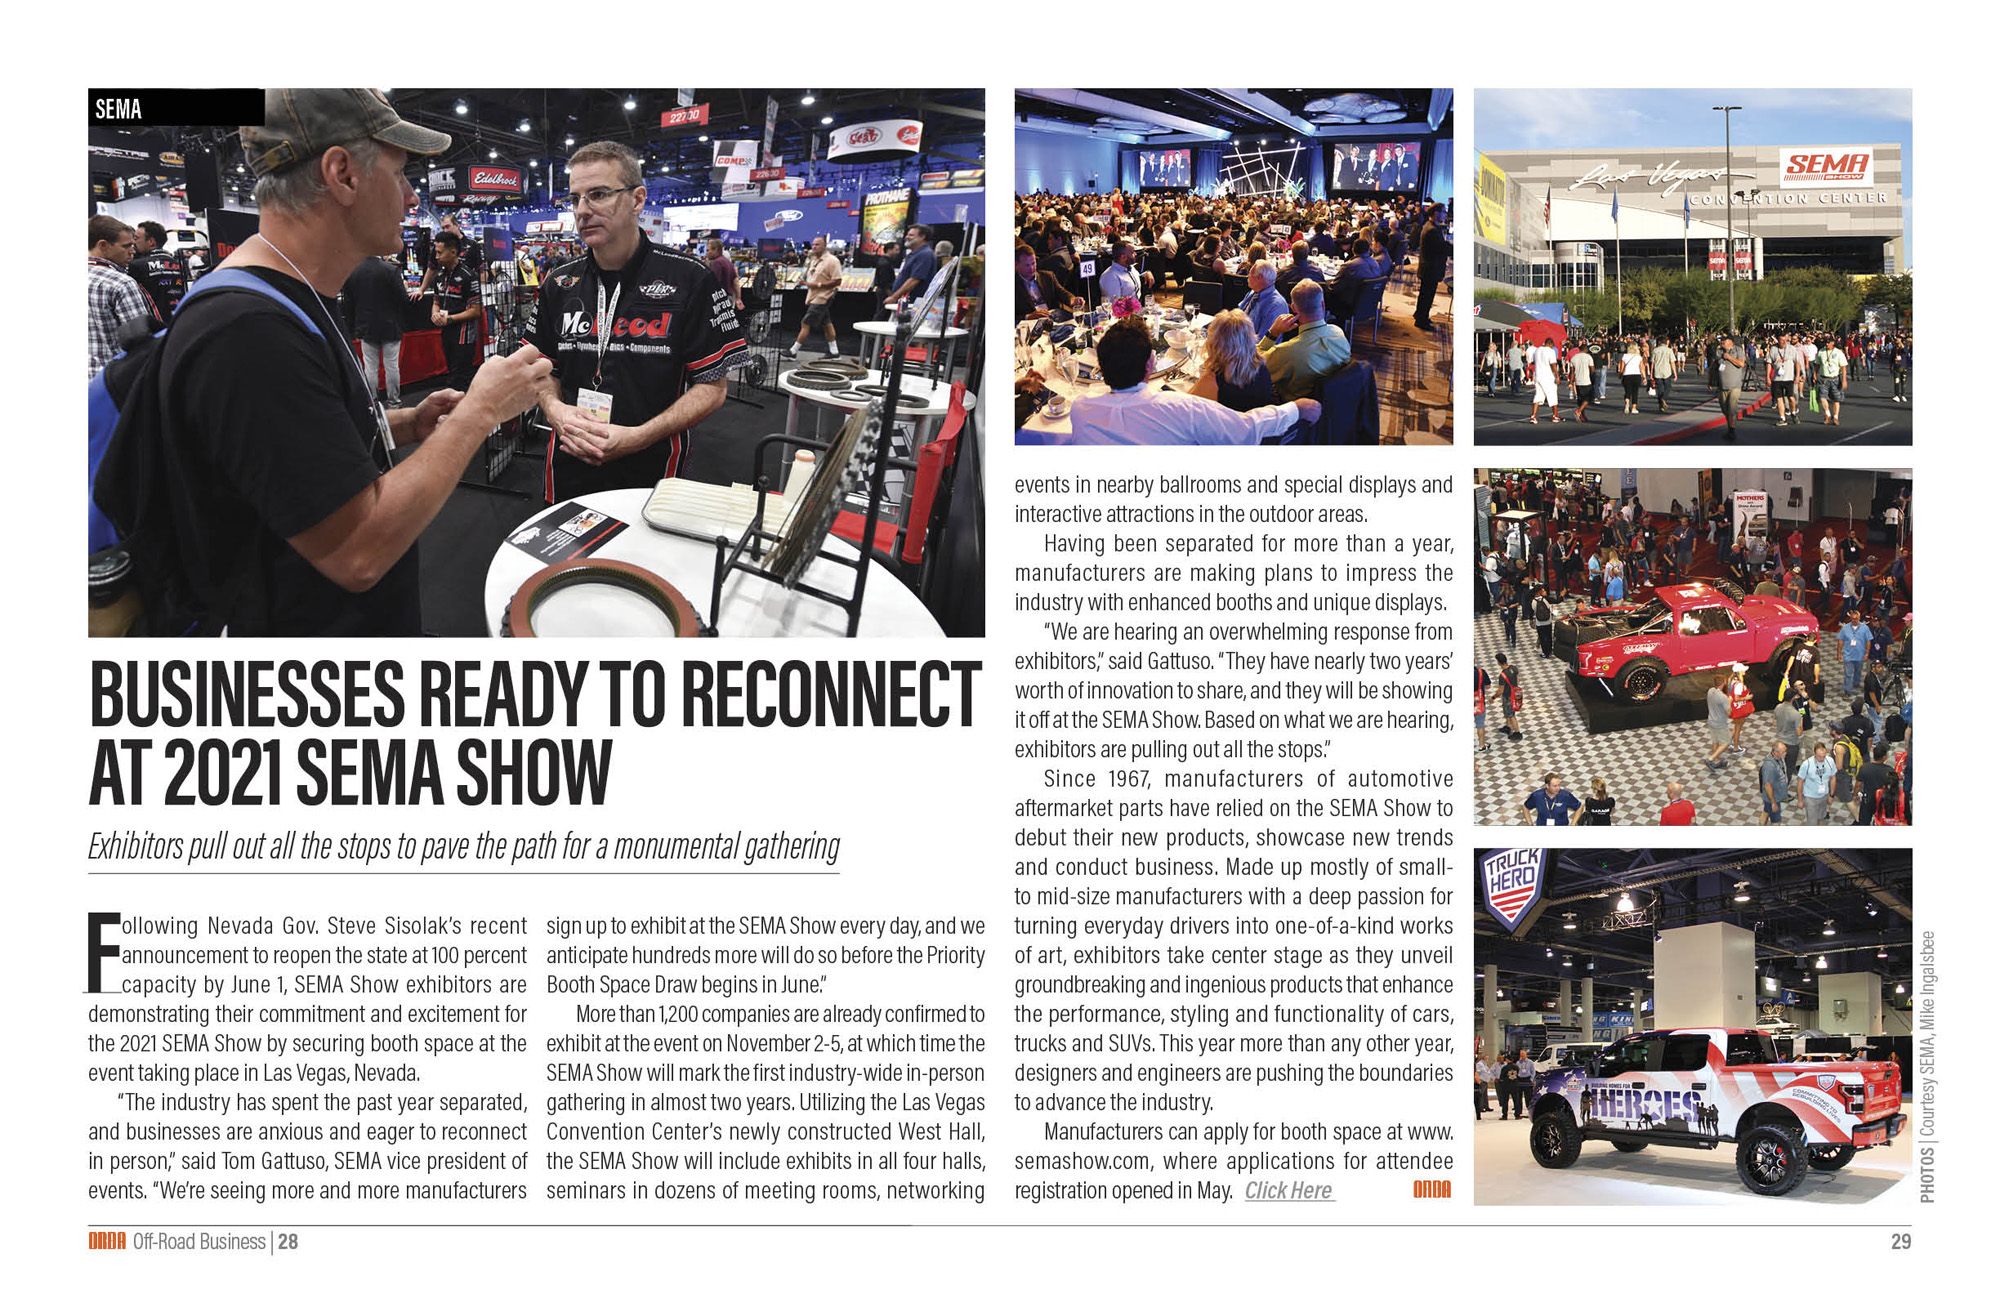 Businesses Ready to Reconnect 
at 2021 Sema Show